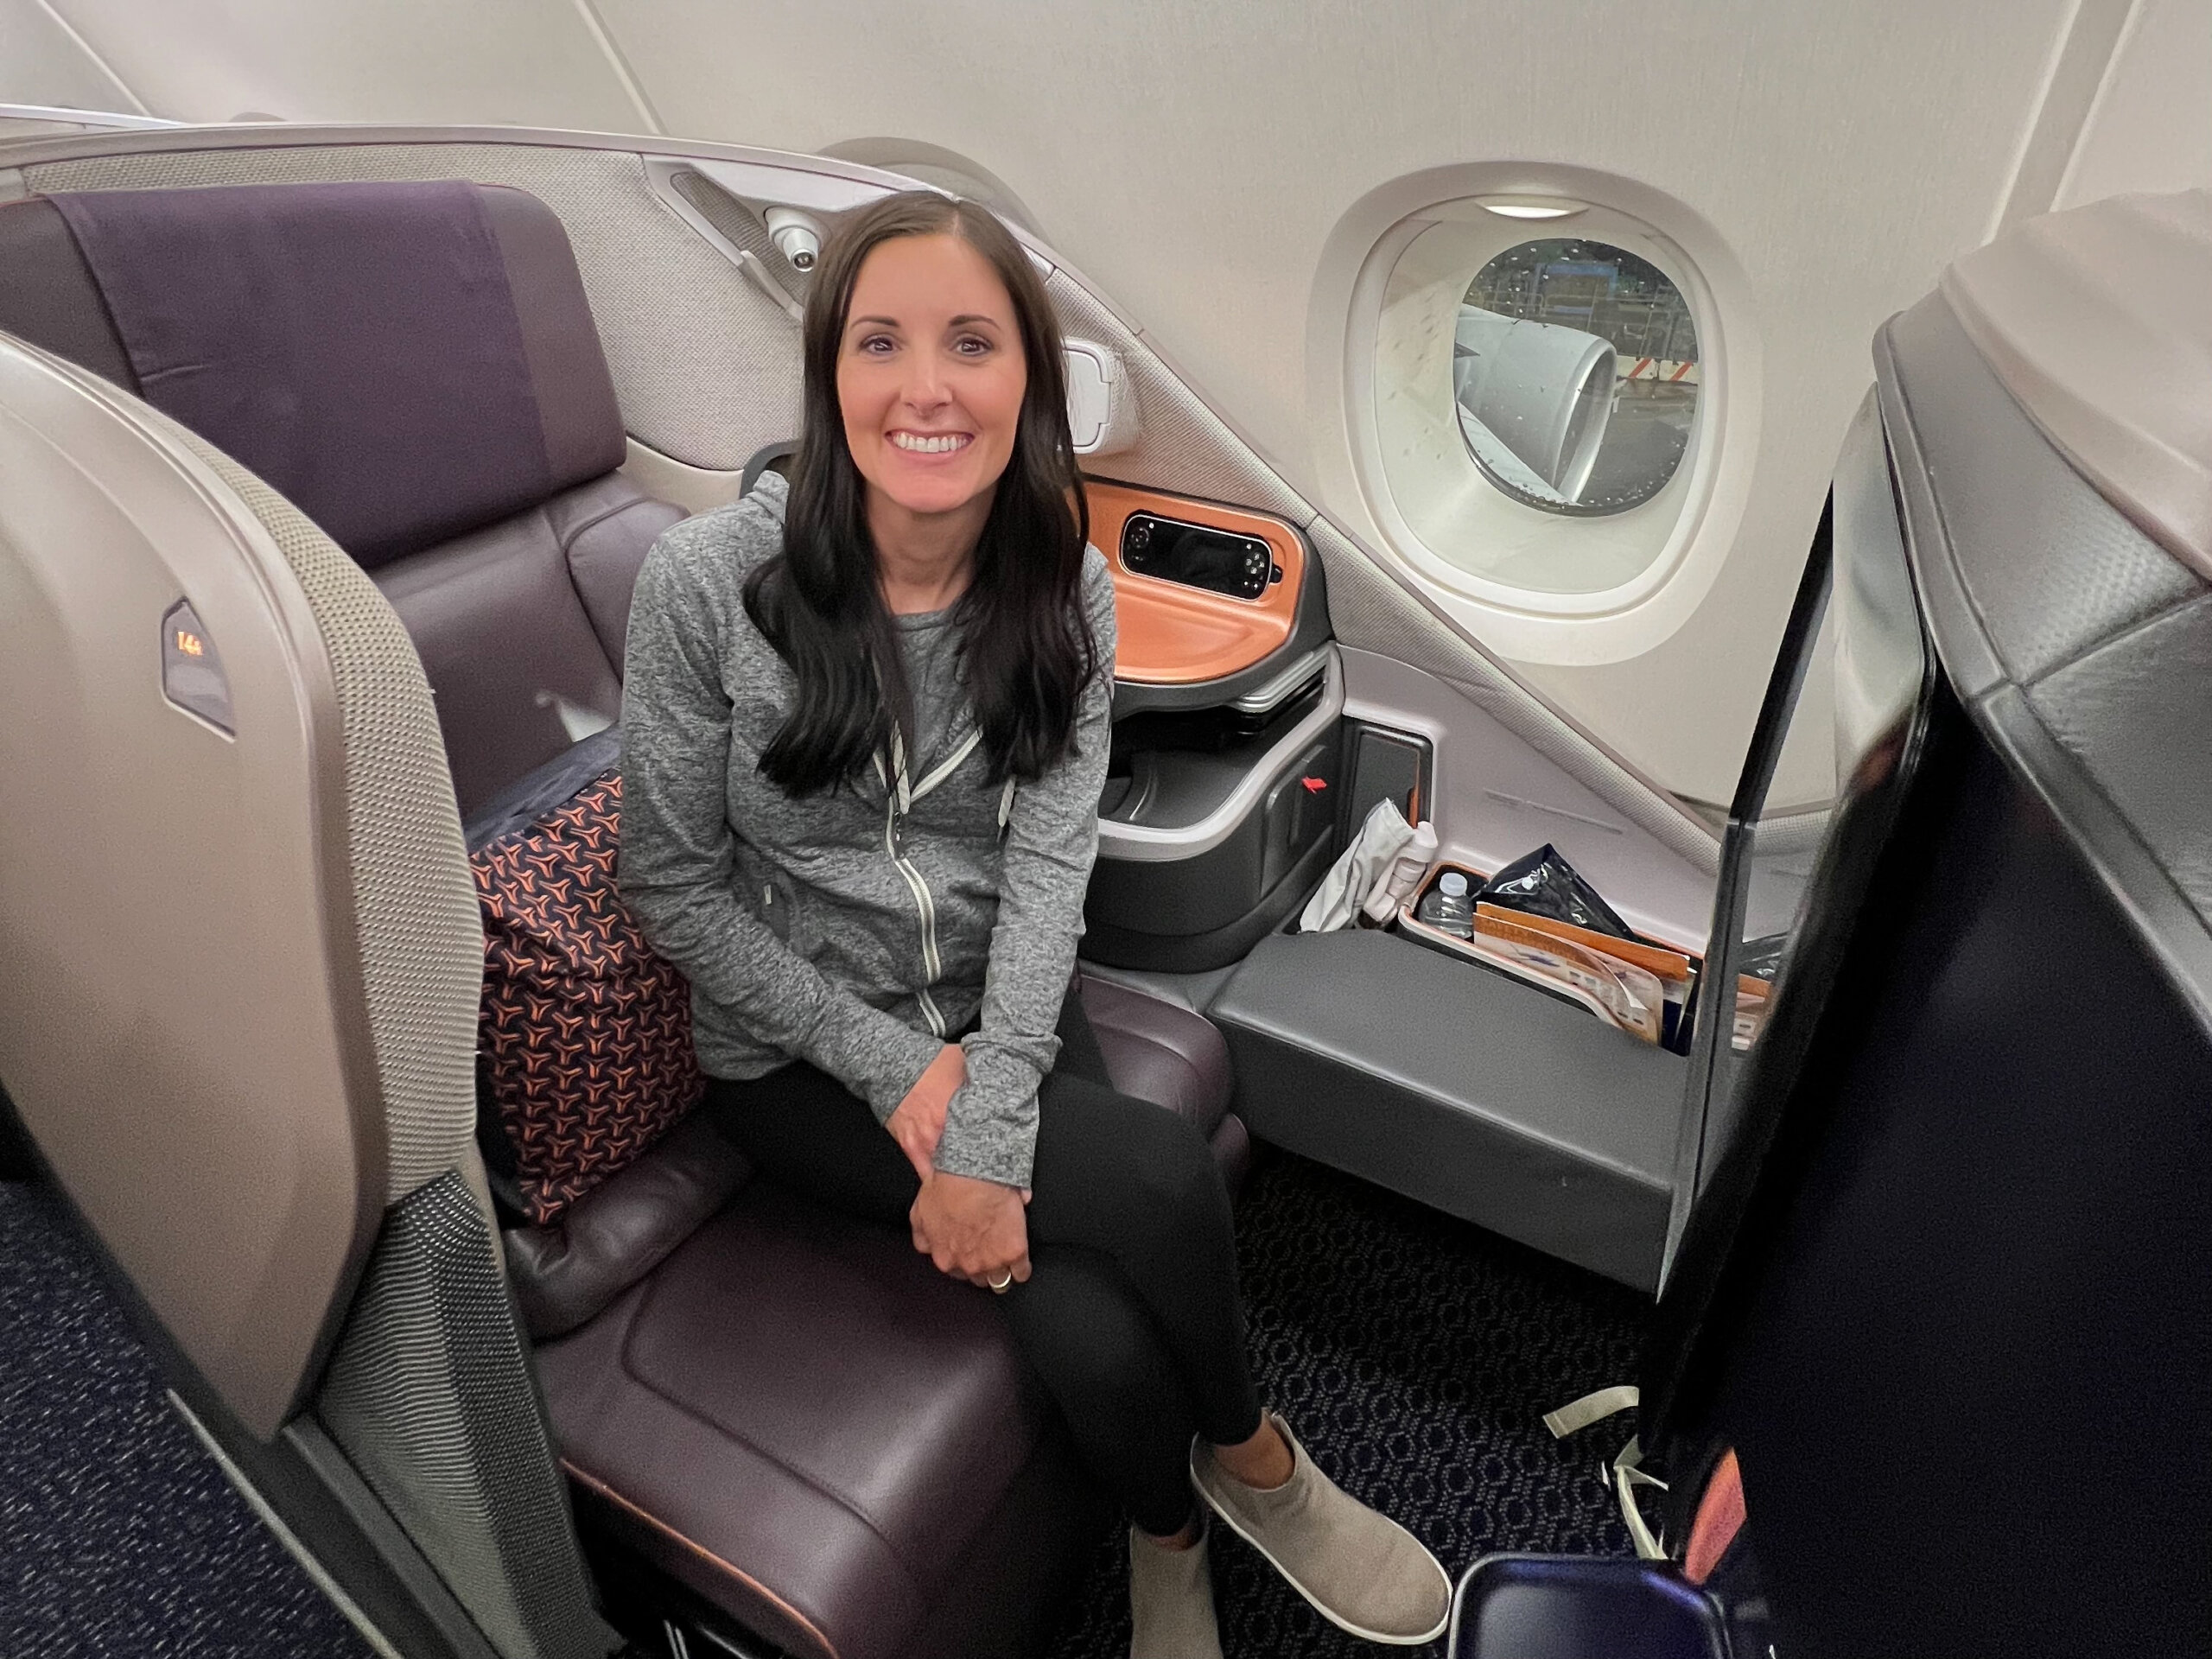 Woman sitting in business class seat on airplane